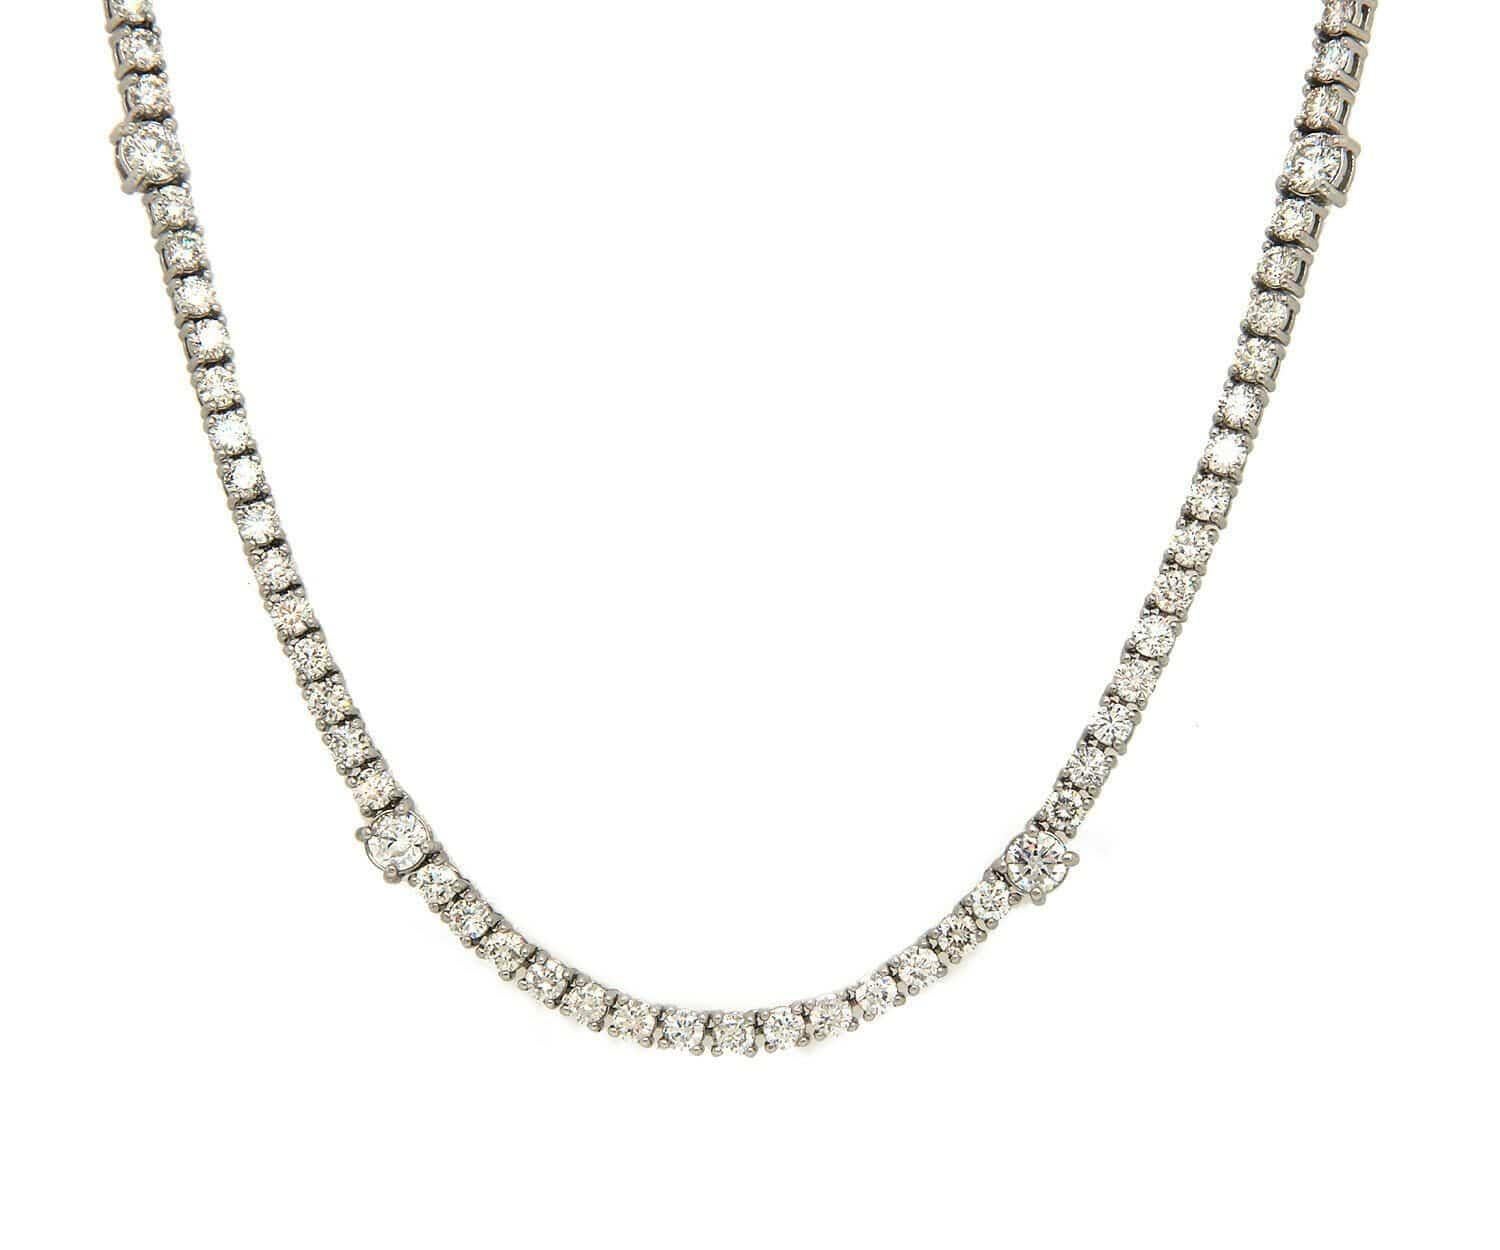 12.54ctw Round Diamond Station Tennis Necklace in 14K

Round Diamond Station Tennis Necklace
14K White Gold
Diamonds Carat Weight: Approx. 12.54ctw
Clarity: SI2
Color: G - H
Necklace Width: Approx. 2.4 – 3.7 MM
Necklace Length: Approx. 24.0